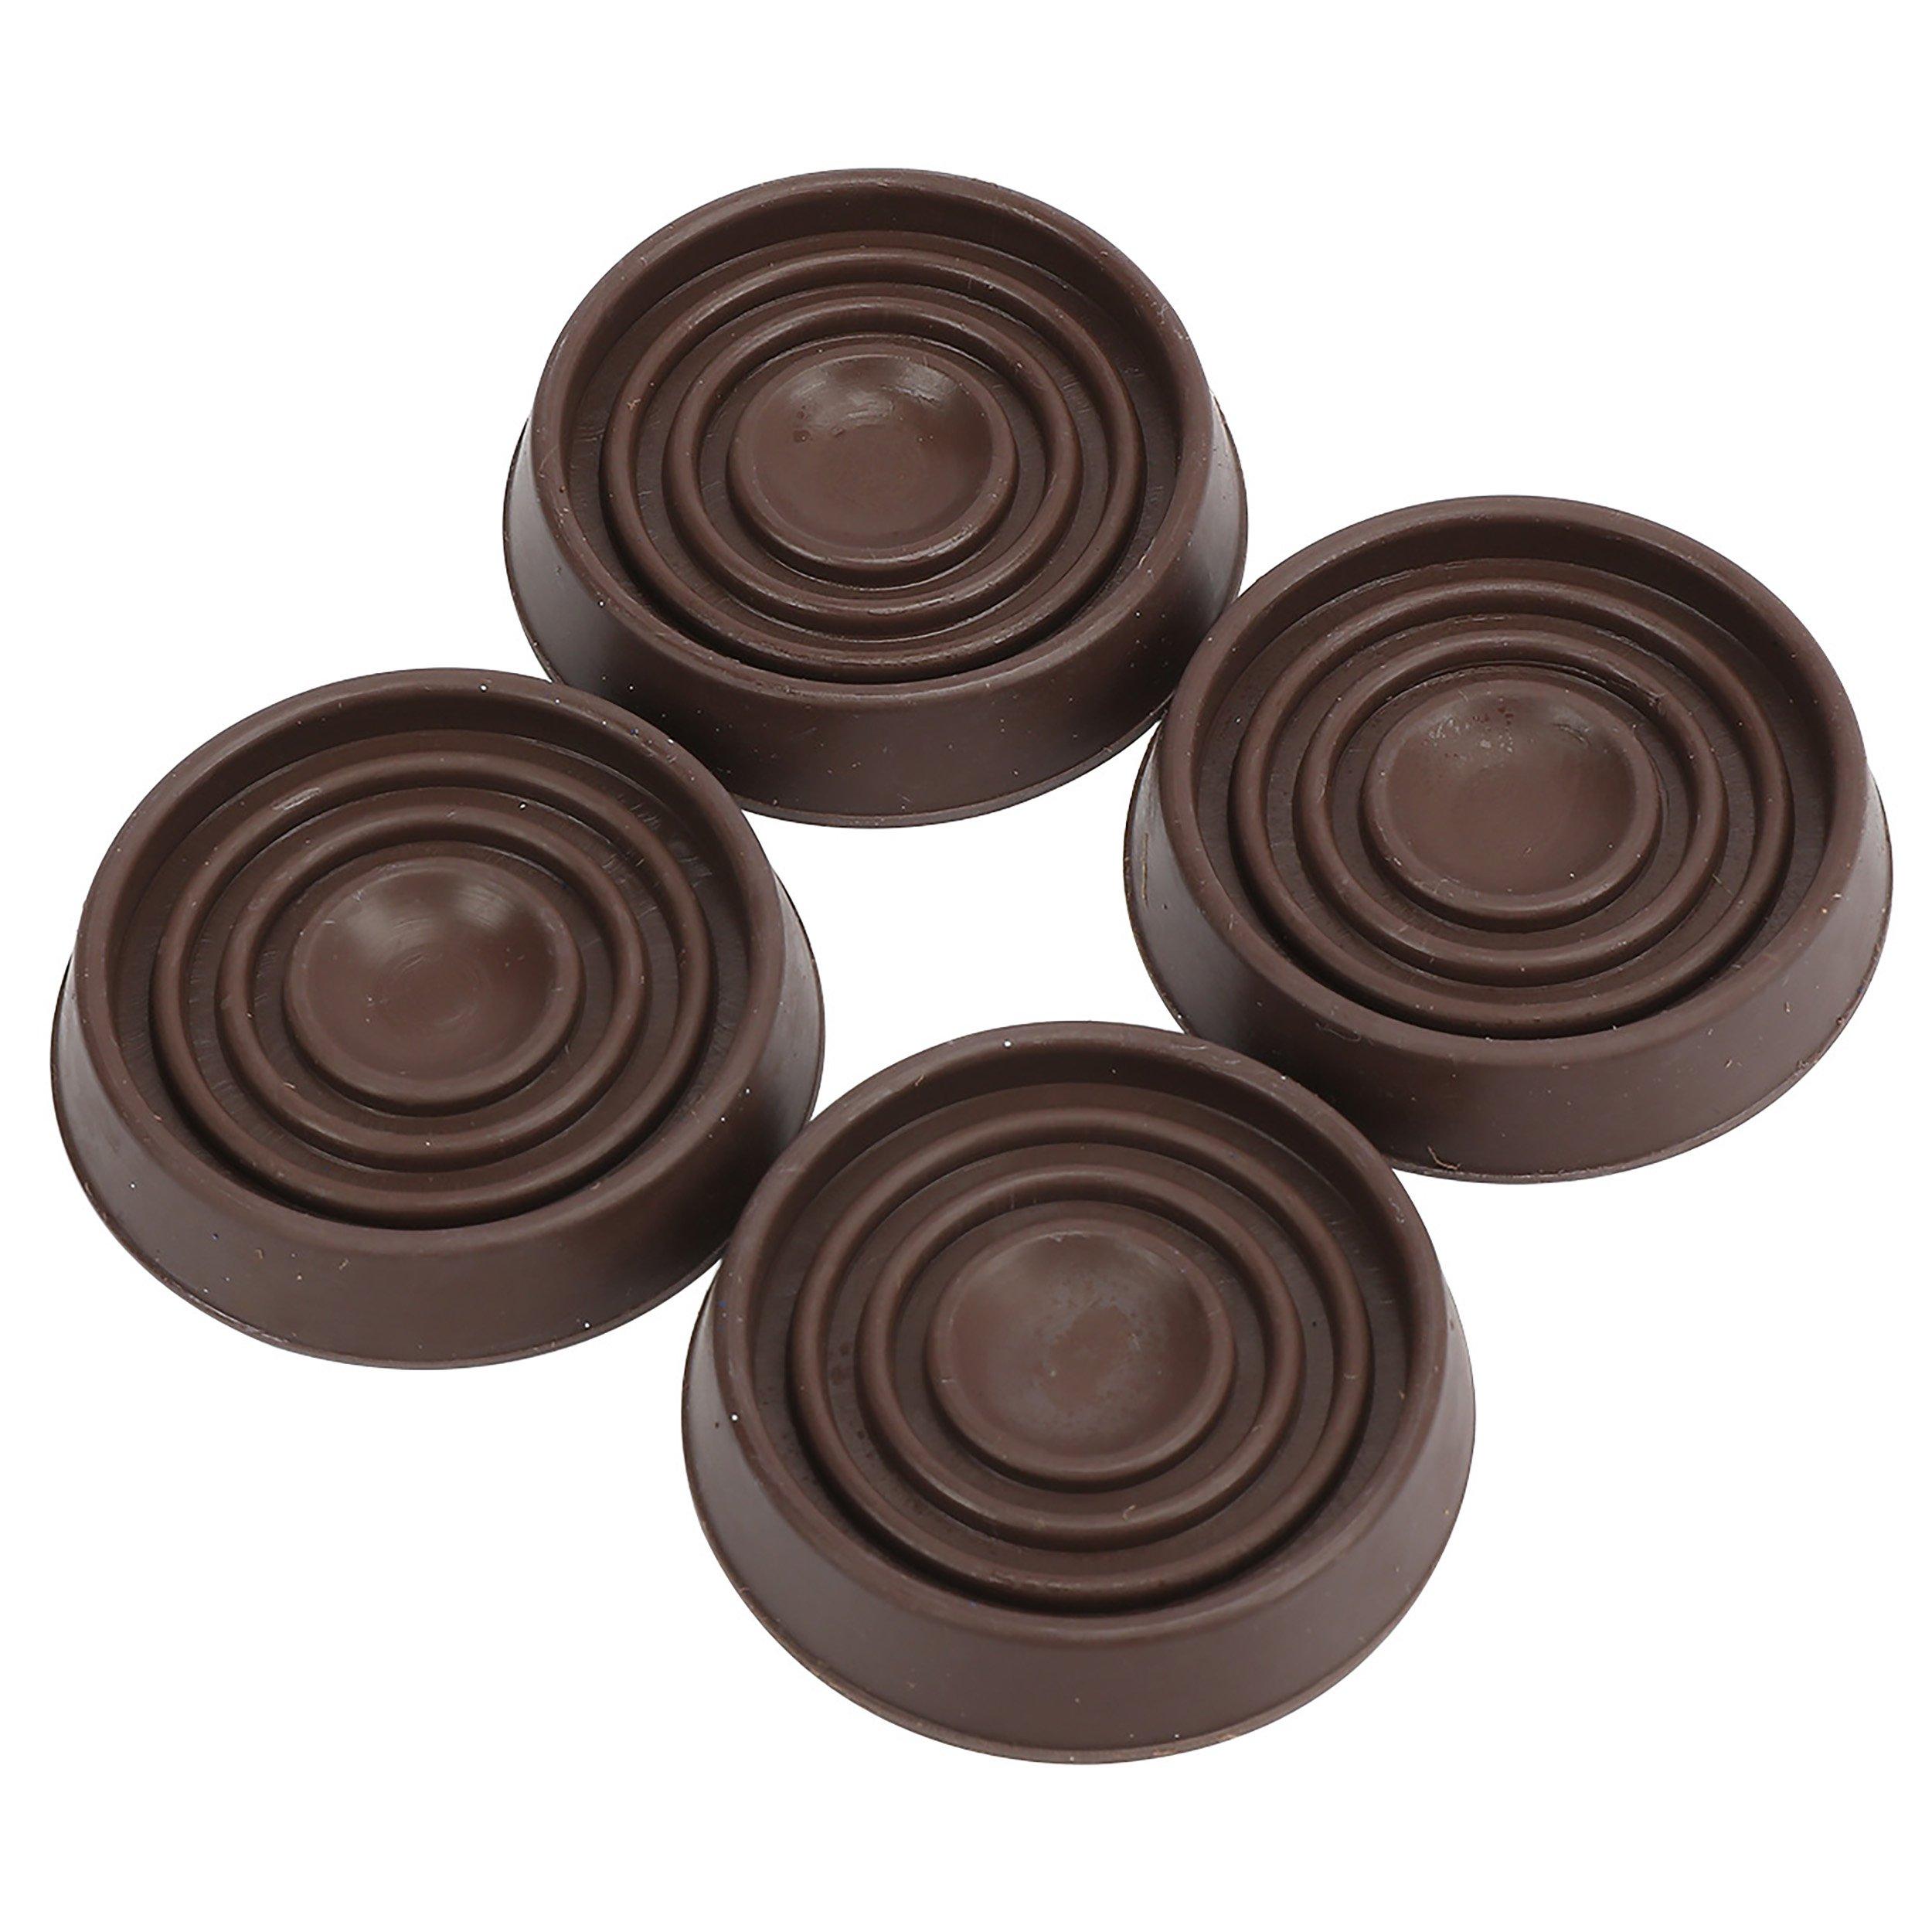 Work Pro 1-1/2in. Small Round Furniture Caps - 4pk.